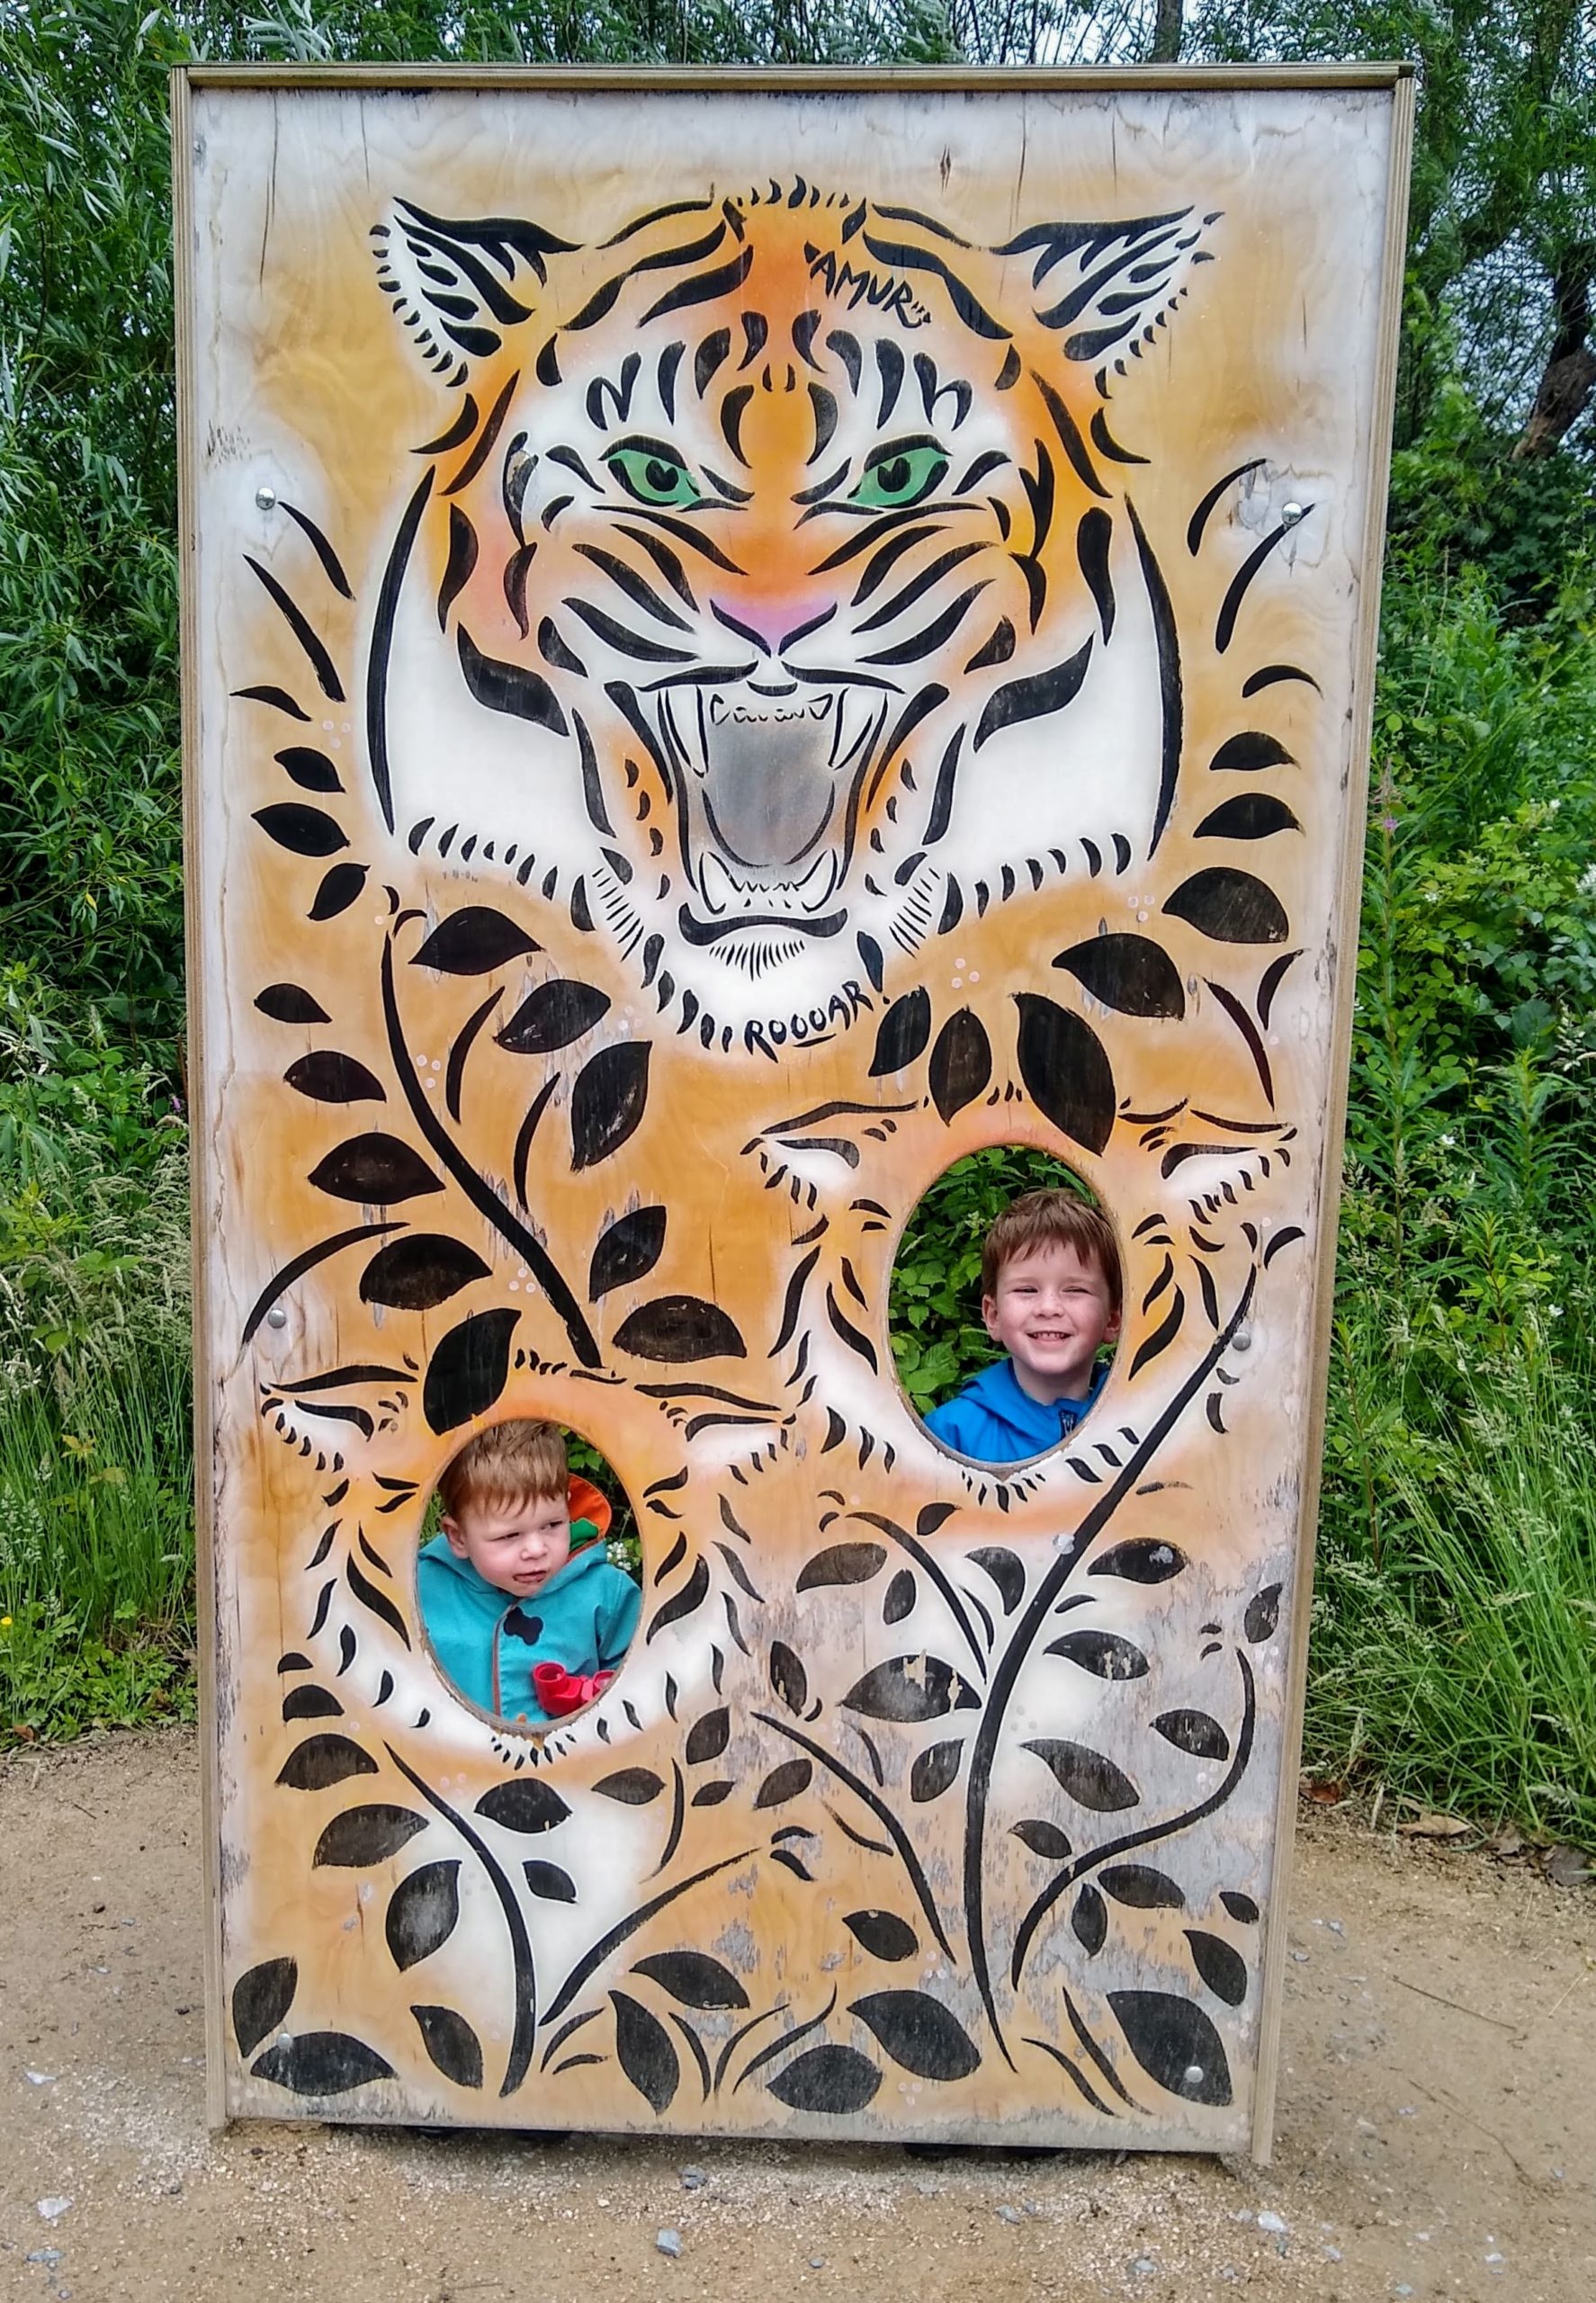 Two boys pose in a tiger photo booth. There is a painted picture of a tiger with two holes cut out for their faces to go through. The post is about my experience with mental health. Are you ok? Don't be afraid to seek help no matter how scary it feels. The world is a better place with you in it.